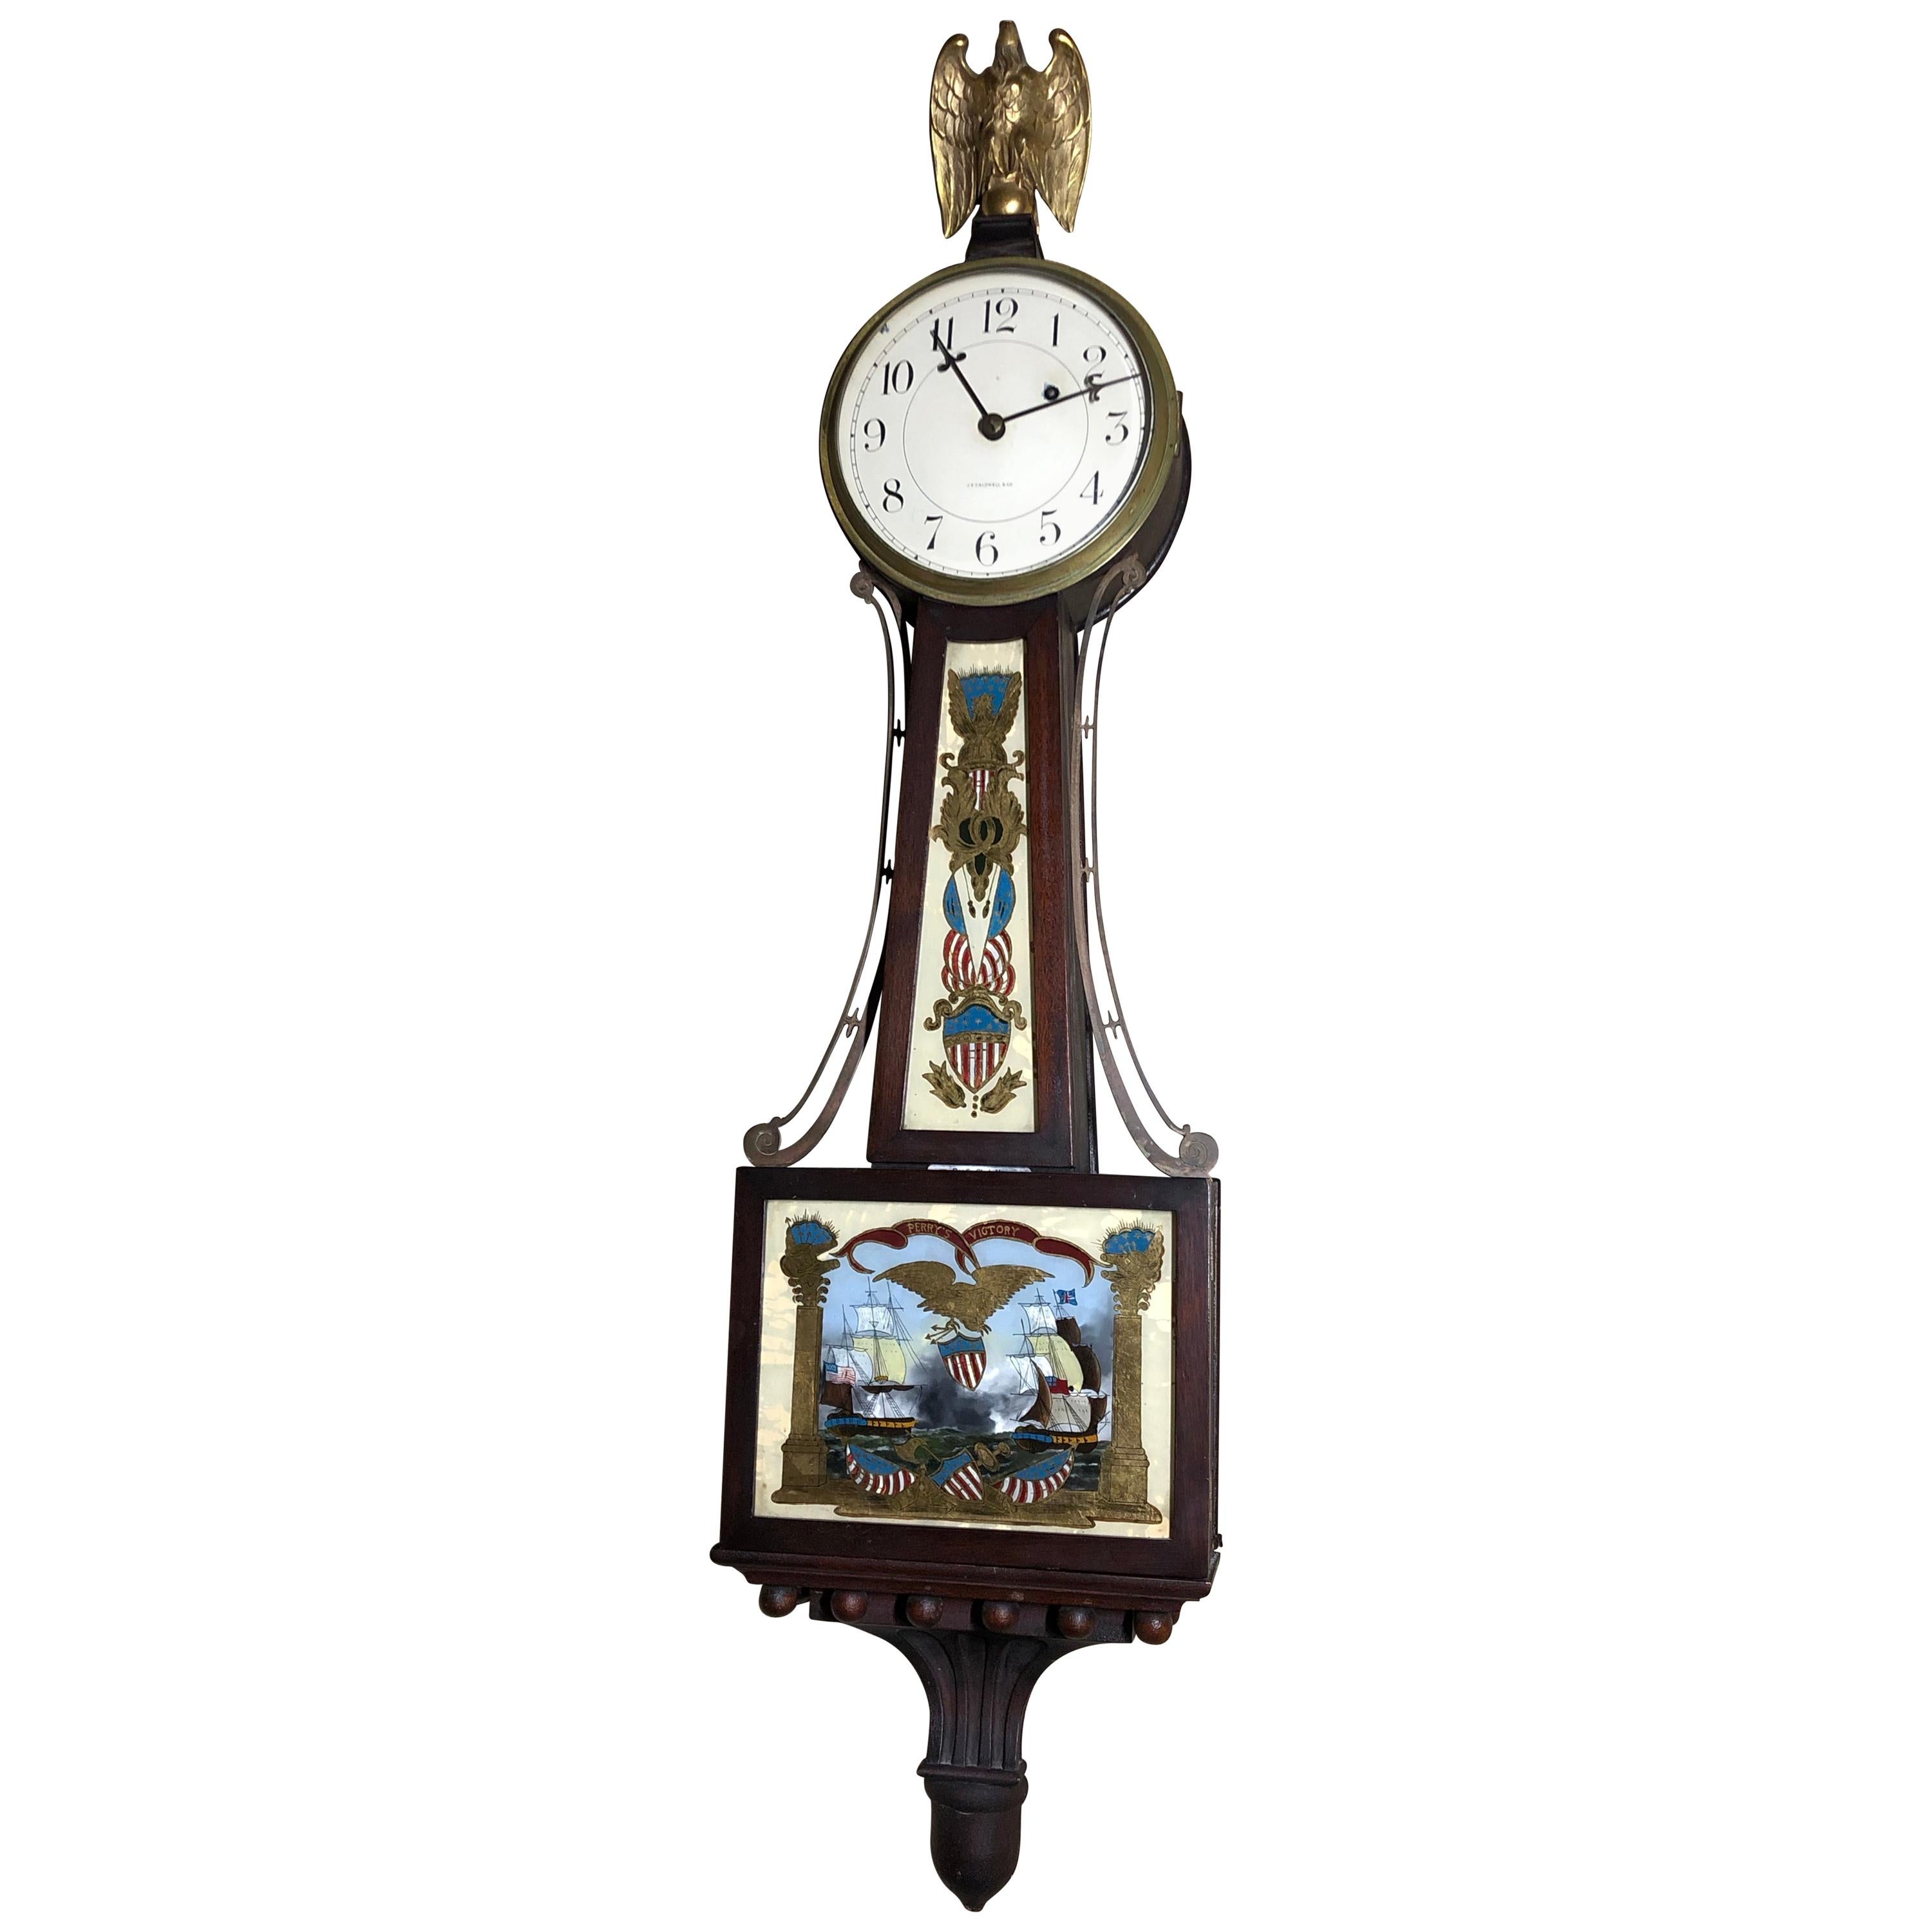 Waltham Clock Co. Waltham, MA. A banjo clock with Perry's Victory tablets